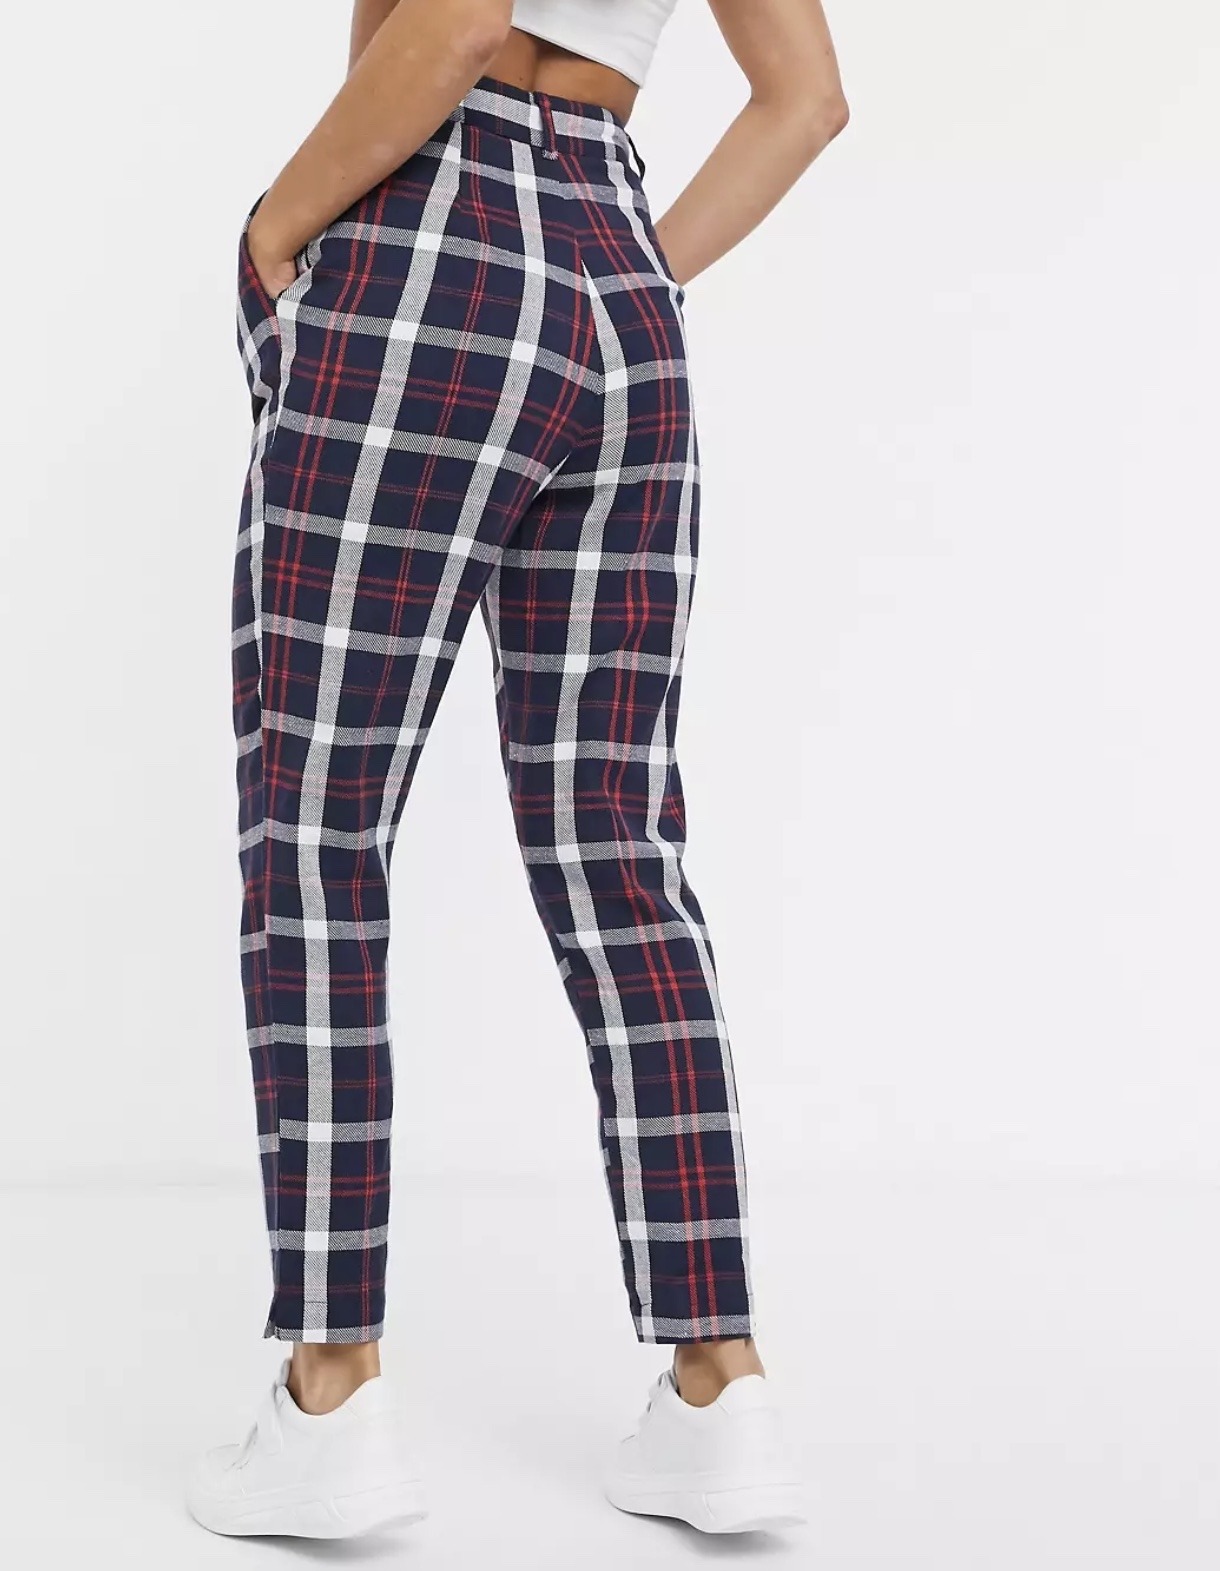 Selena Tailored Trousers in Navy and Red Check – LA CHIC PICK